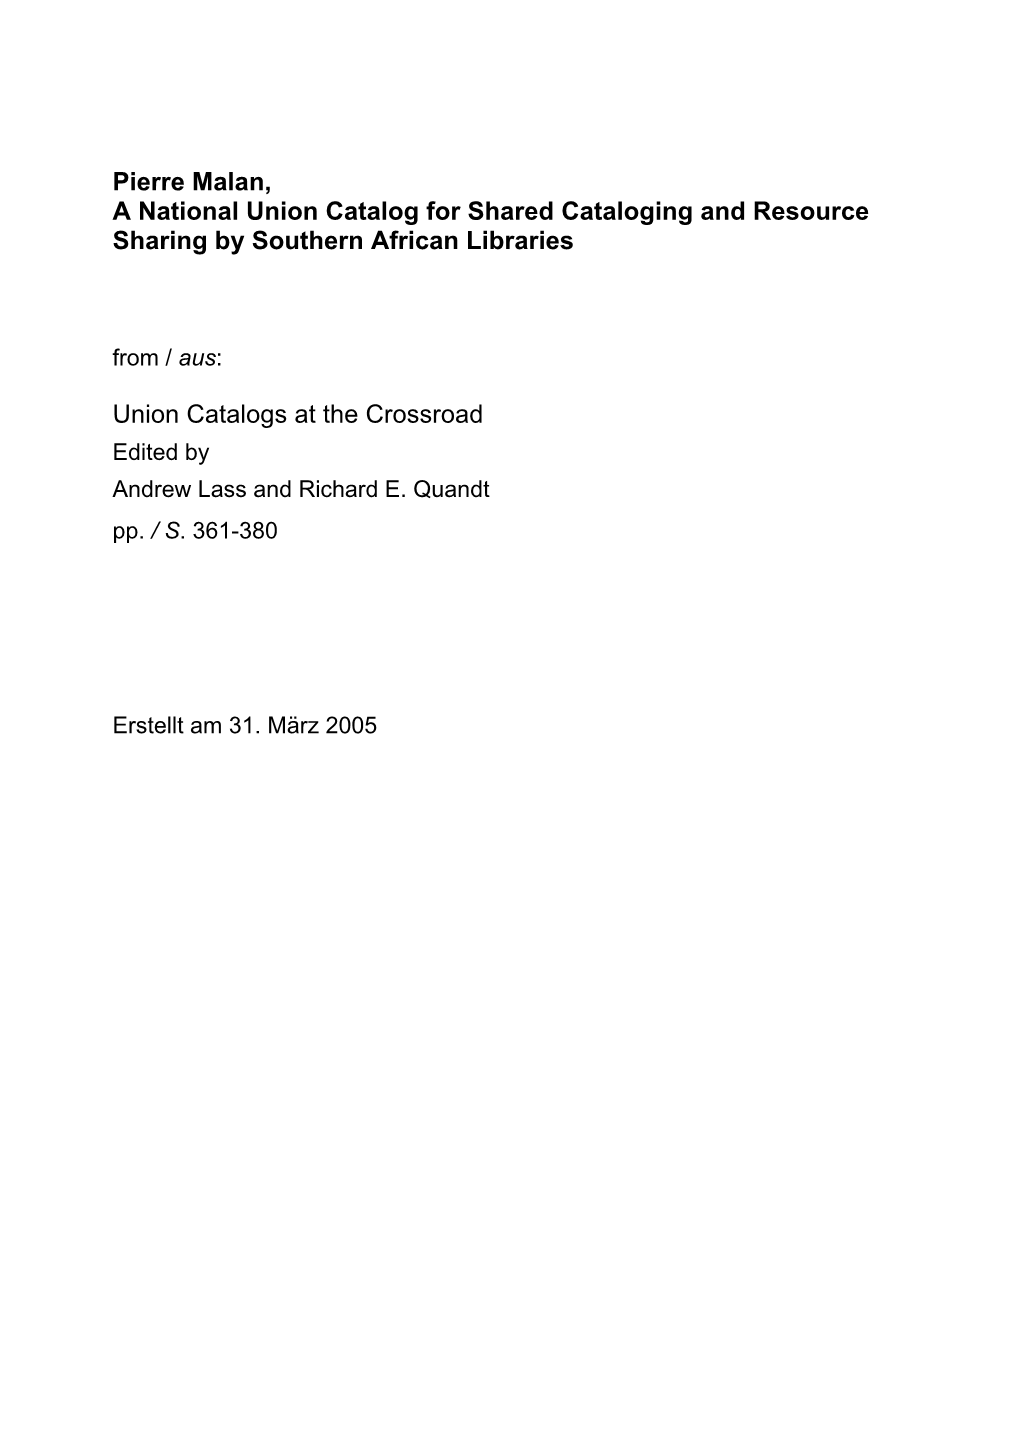 A National Union Catalog for Shared Cataloging and Resource Sharing by Southern African Libraries